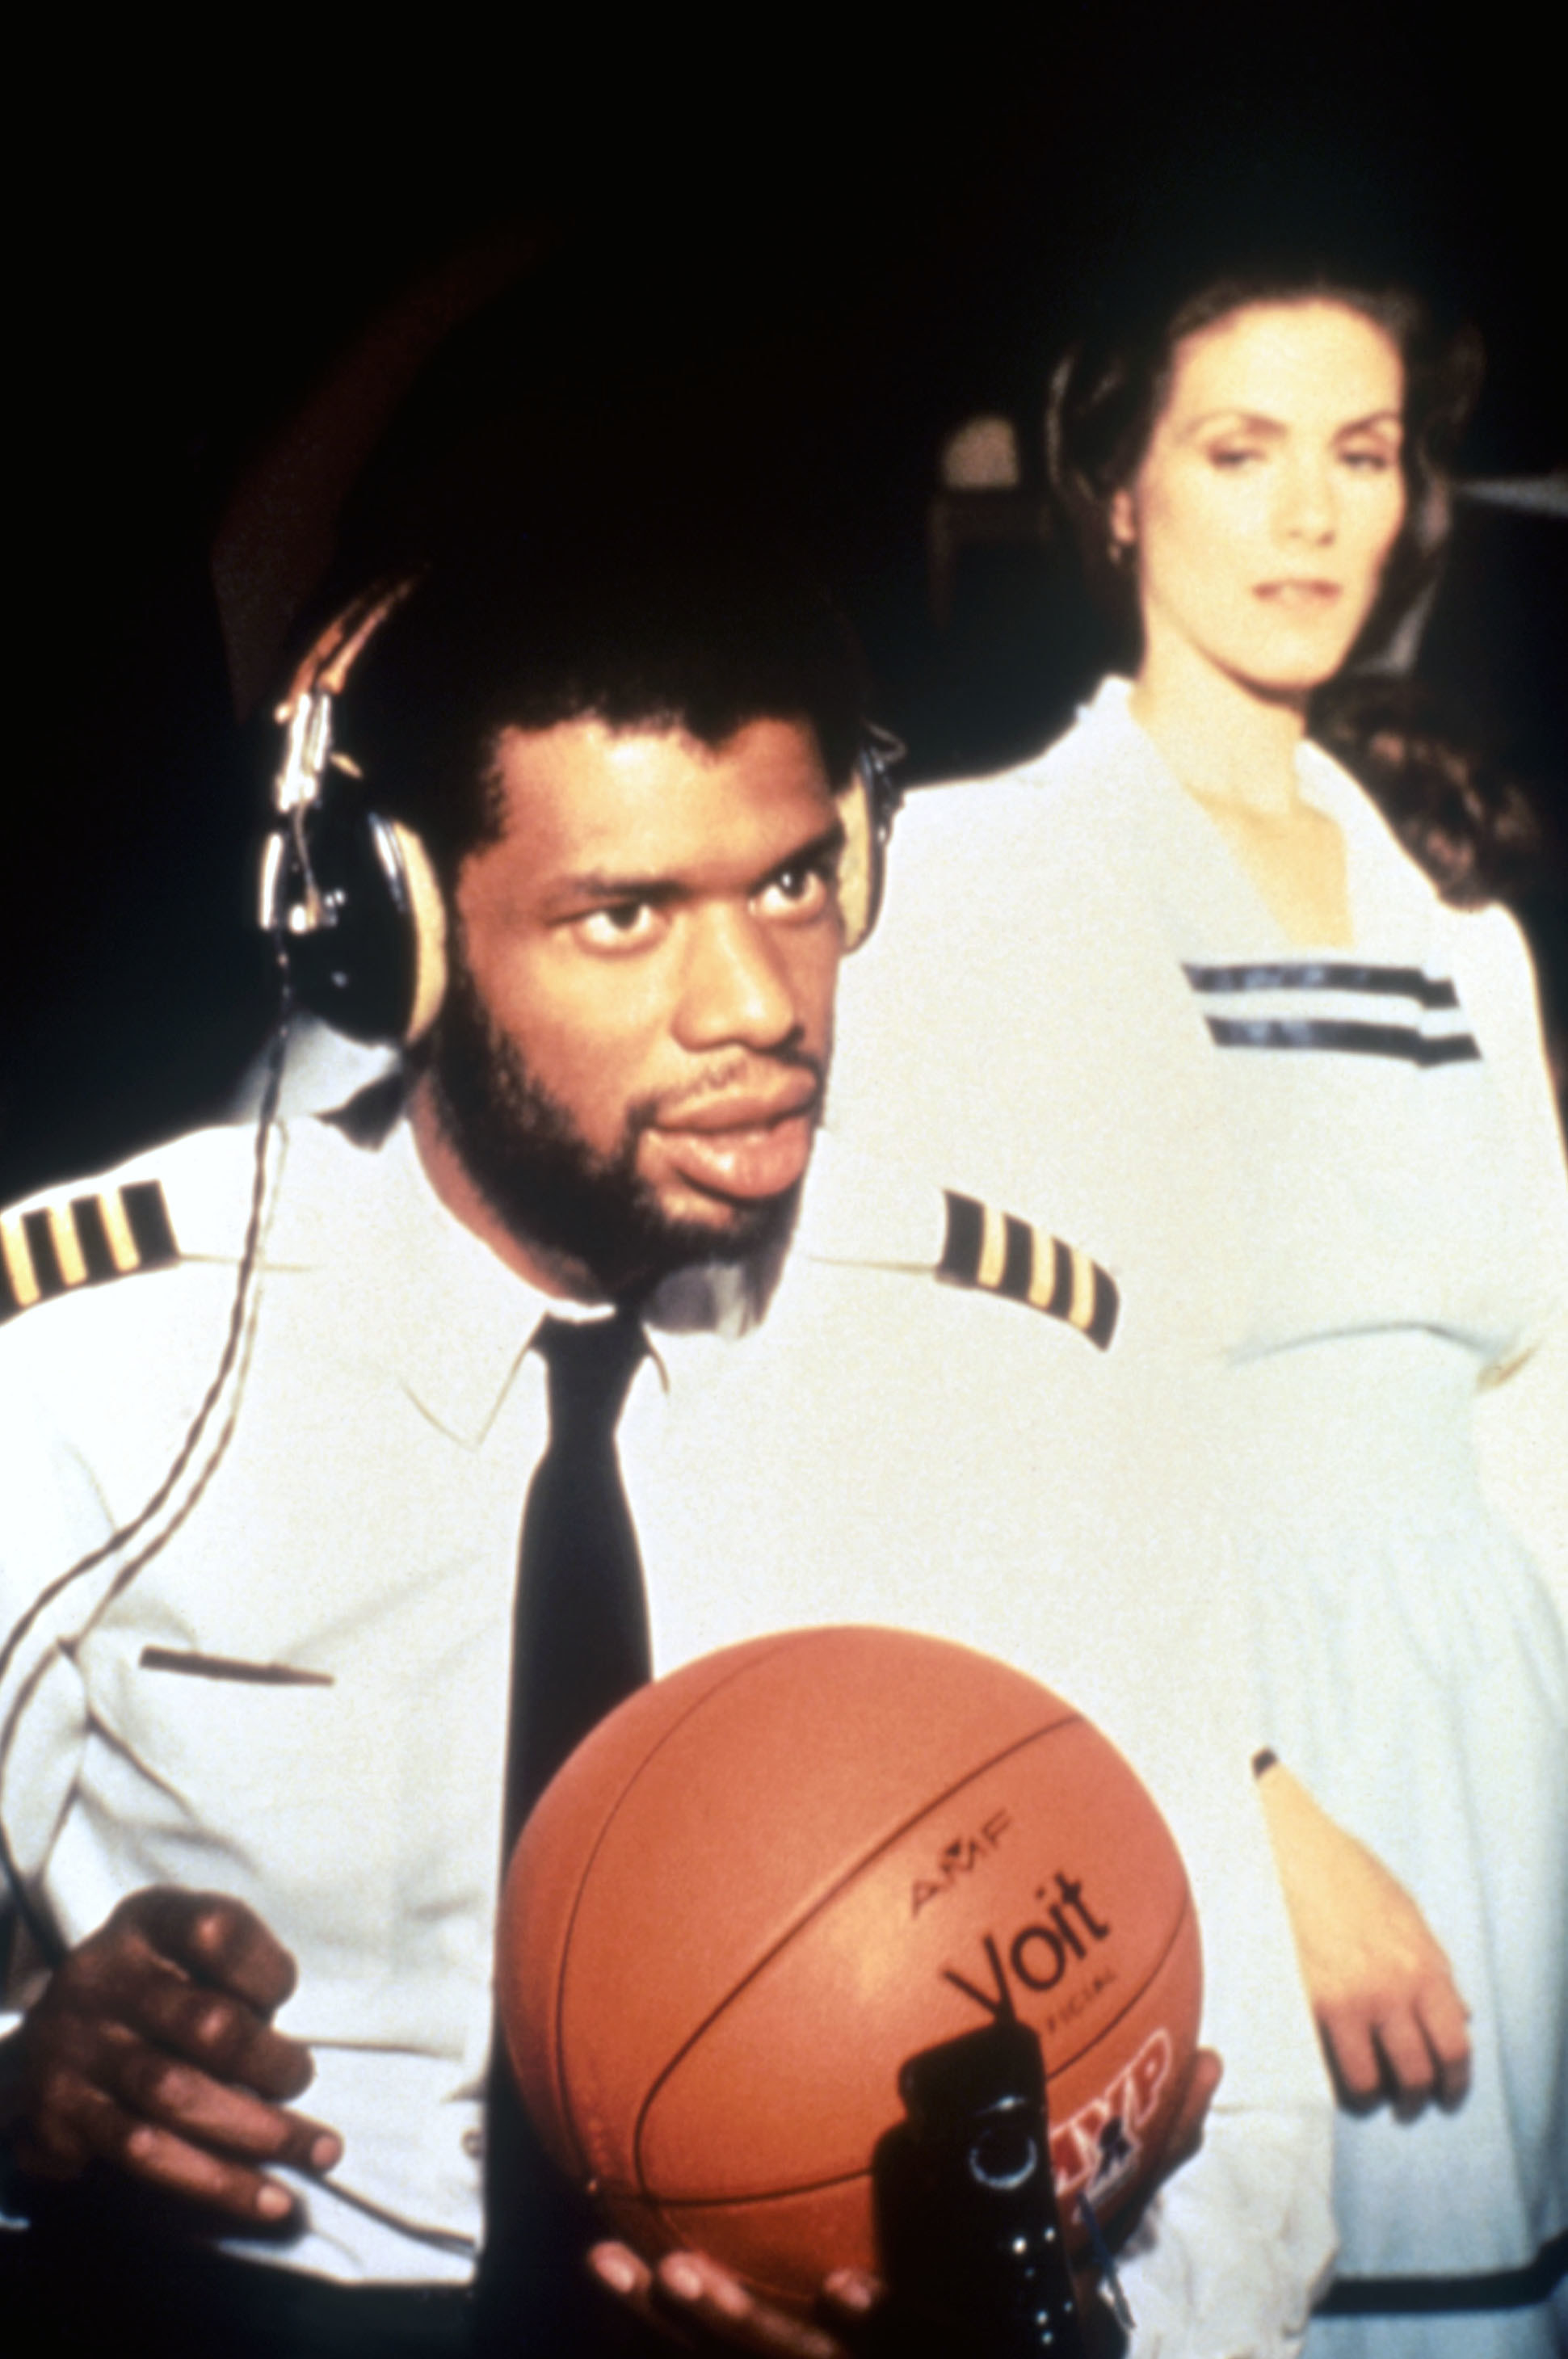 closeup of kareem holding a basketball on the show